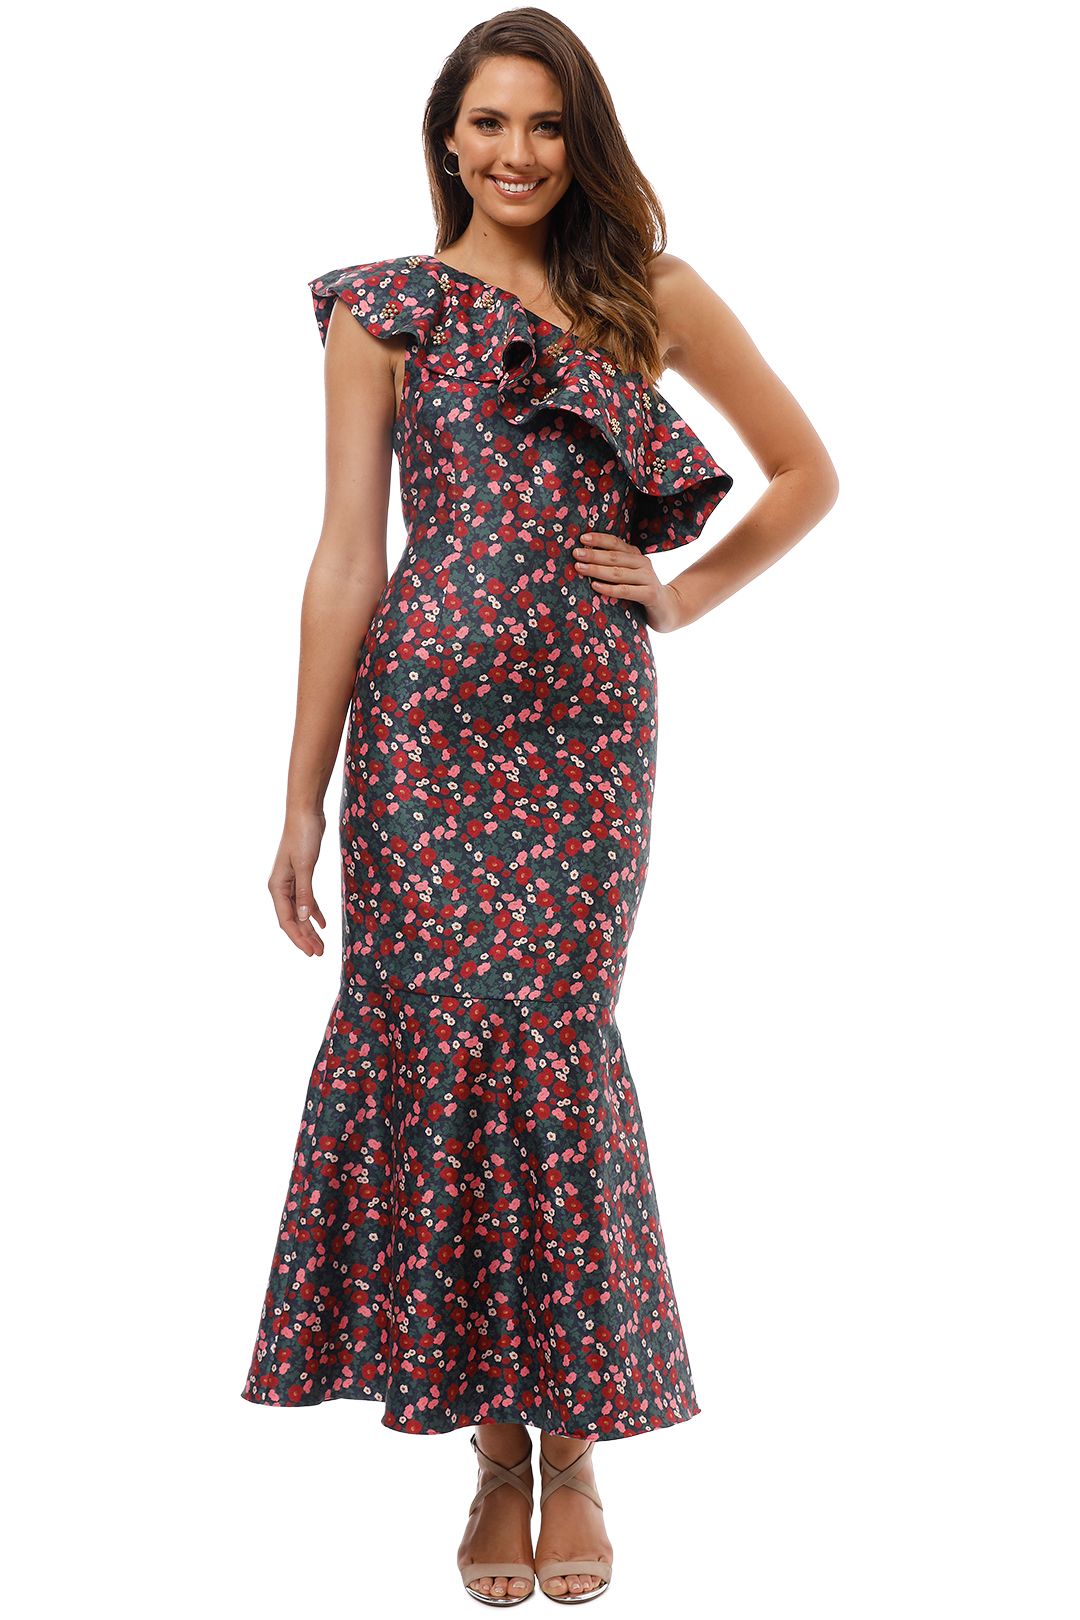 Keepsake The Label - Starlight Gown - Navy Print - Front